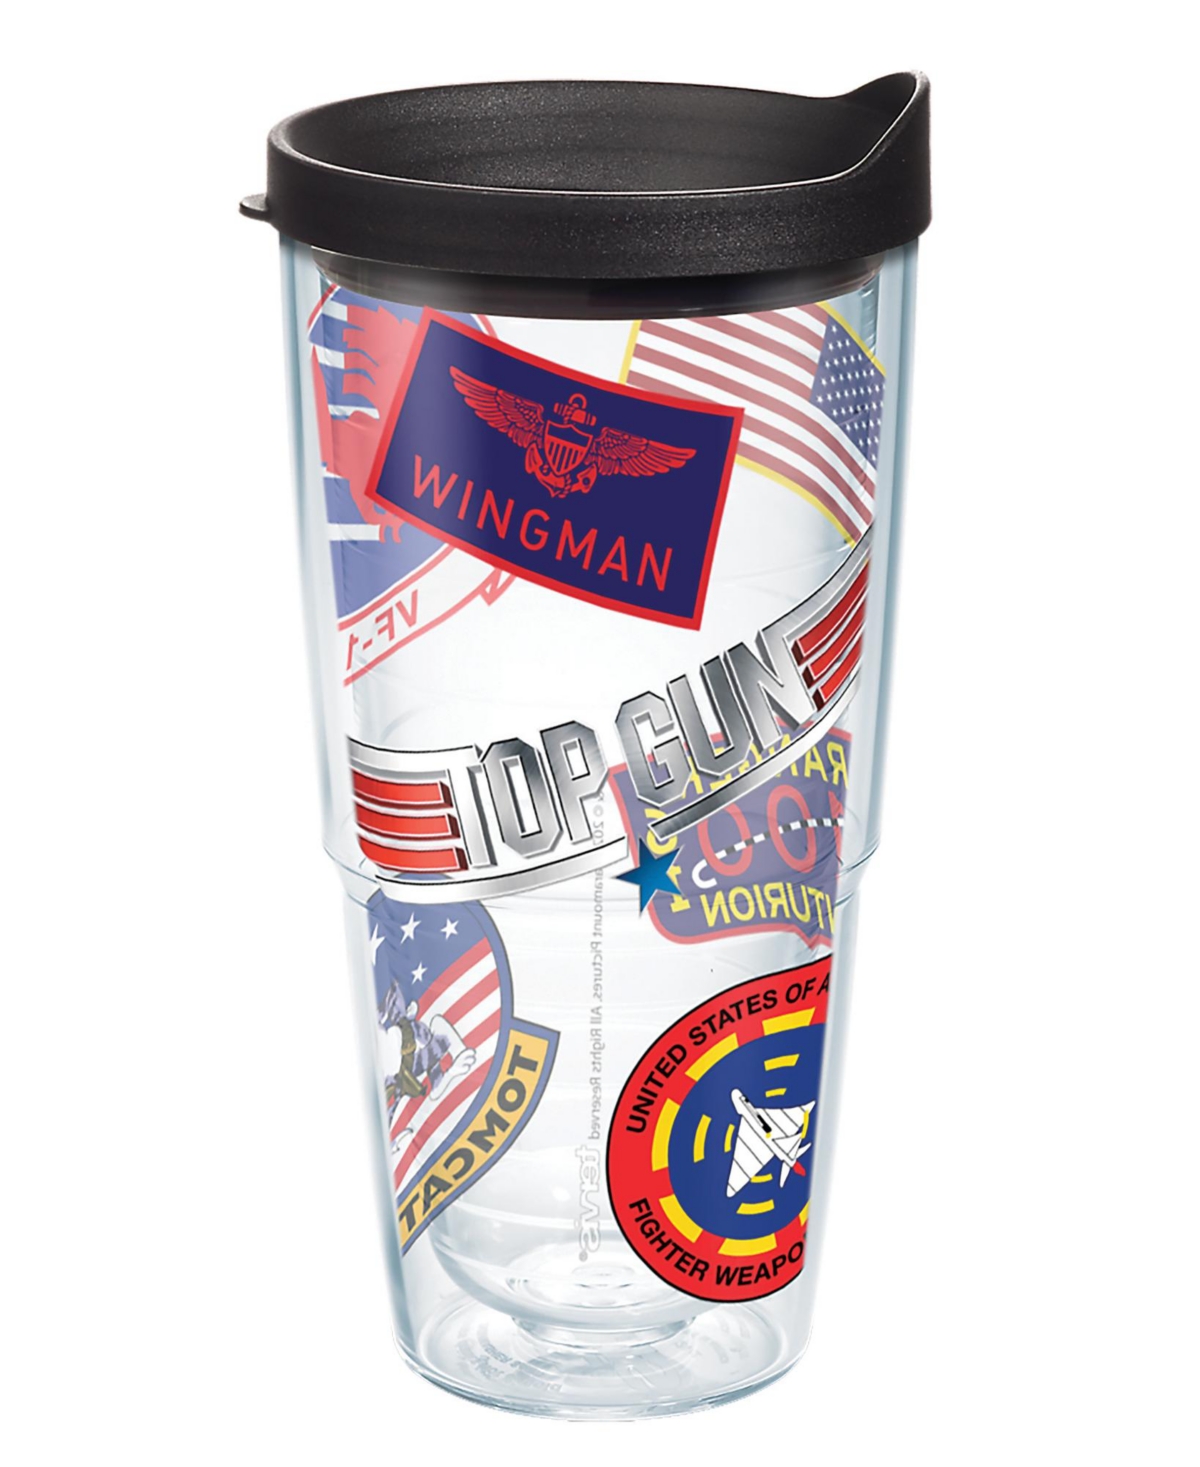 Tervis Tumbler Tervis Top Gun Maverick Patch Collage Made In Usa Double Walled Insulated Tumbler Travel Cup Keeps D In Open Miscellaneous